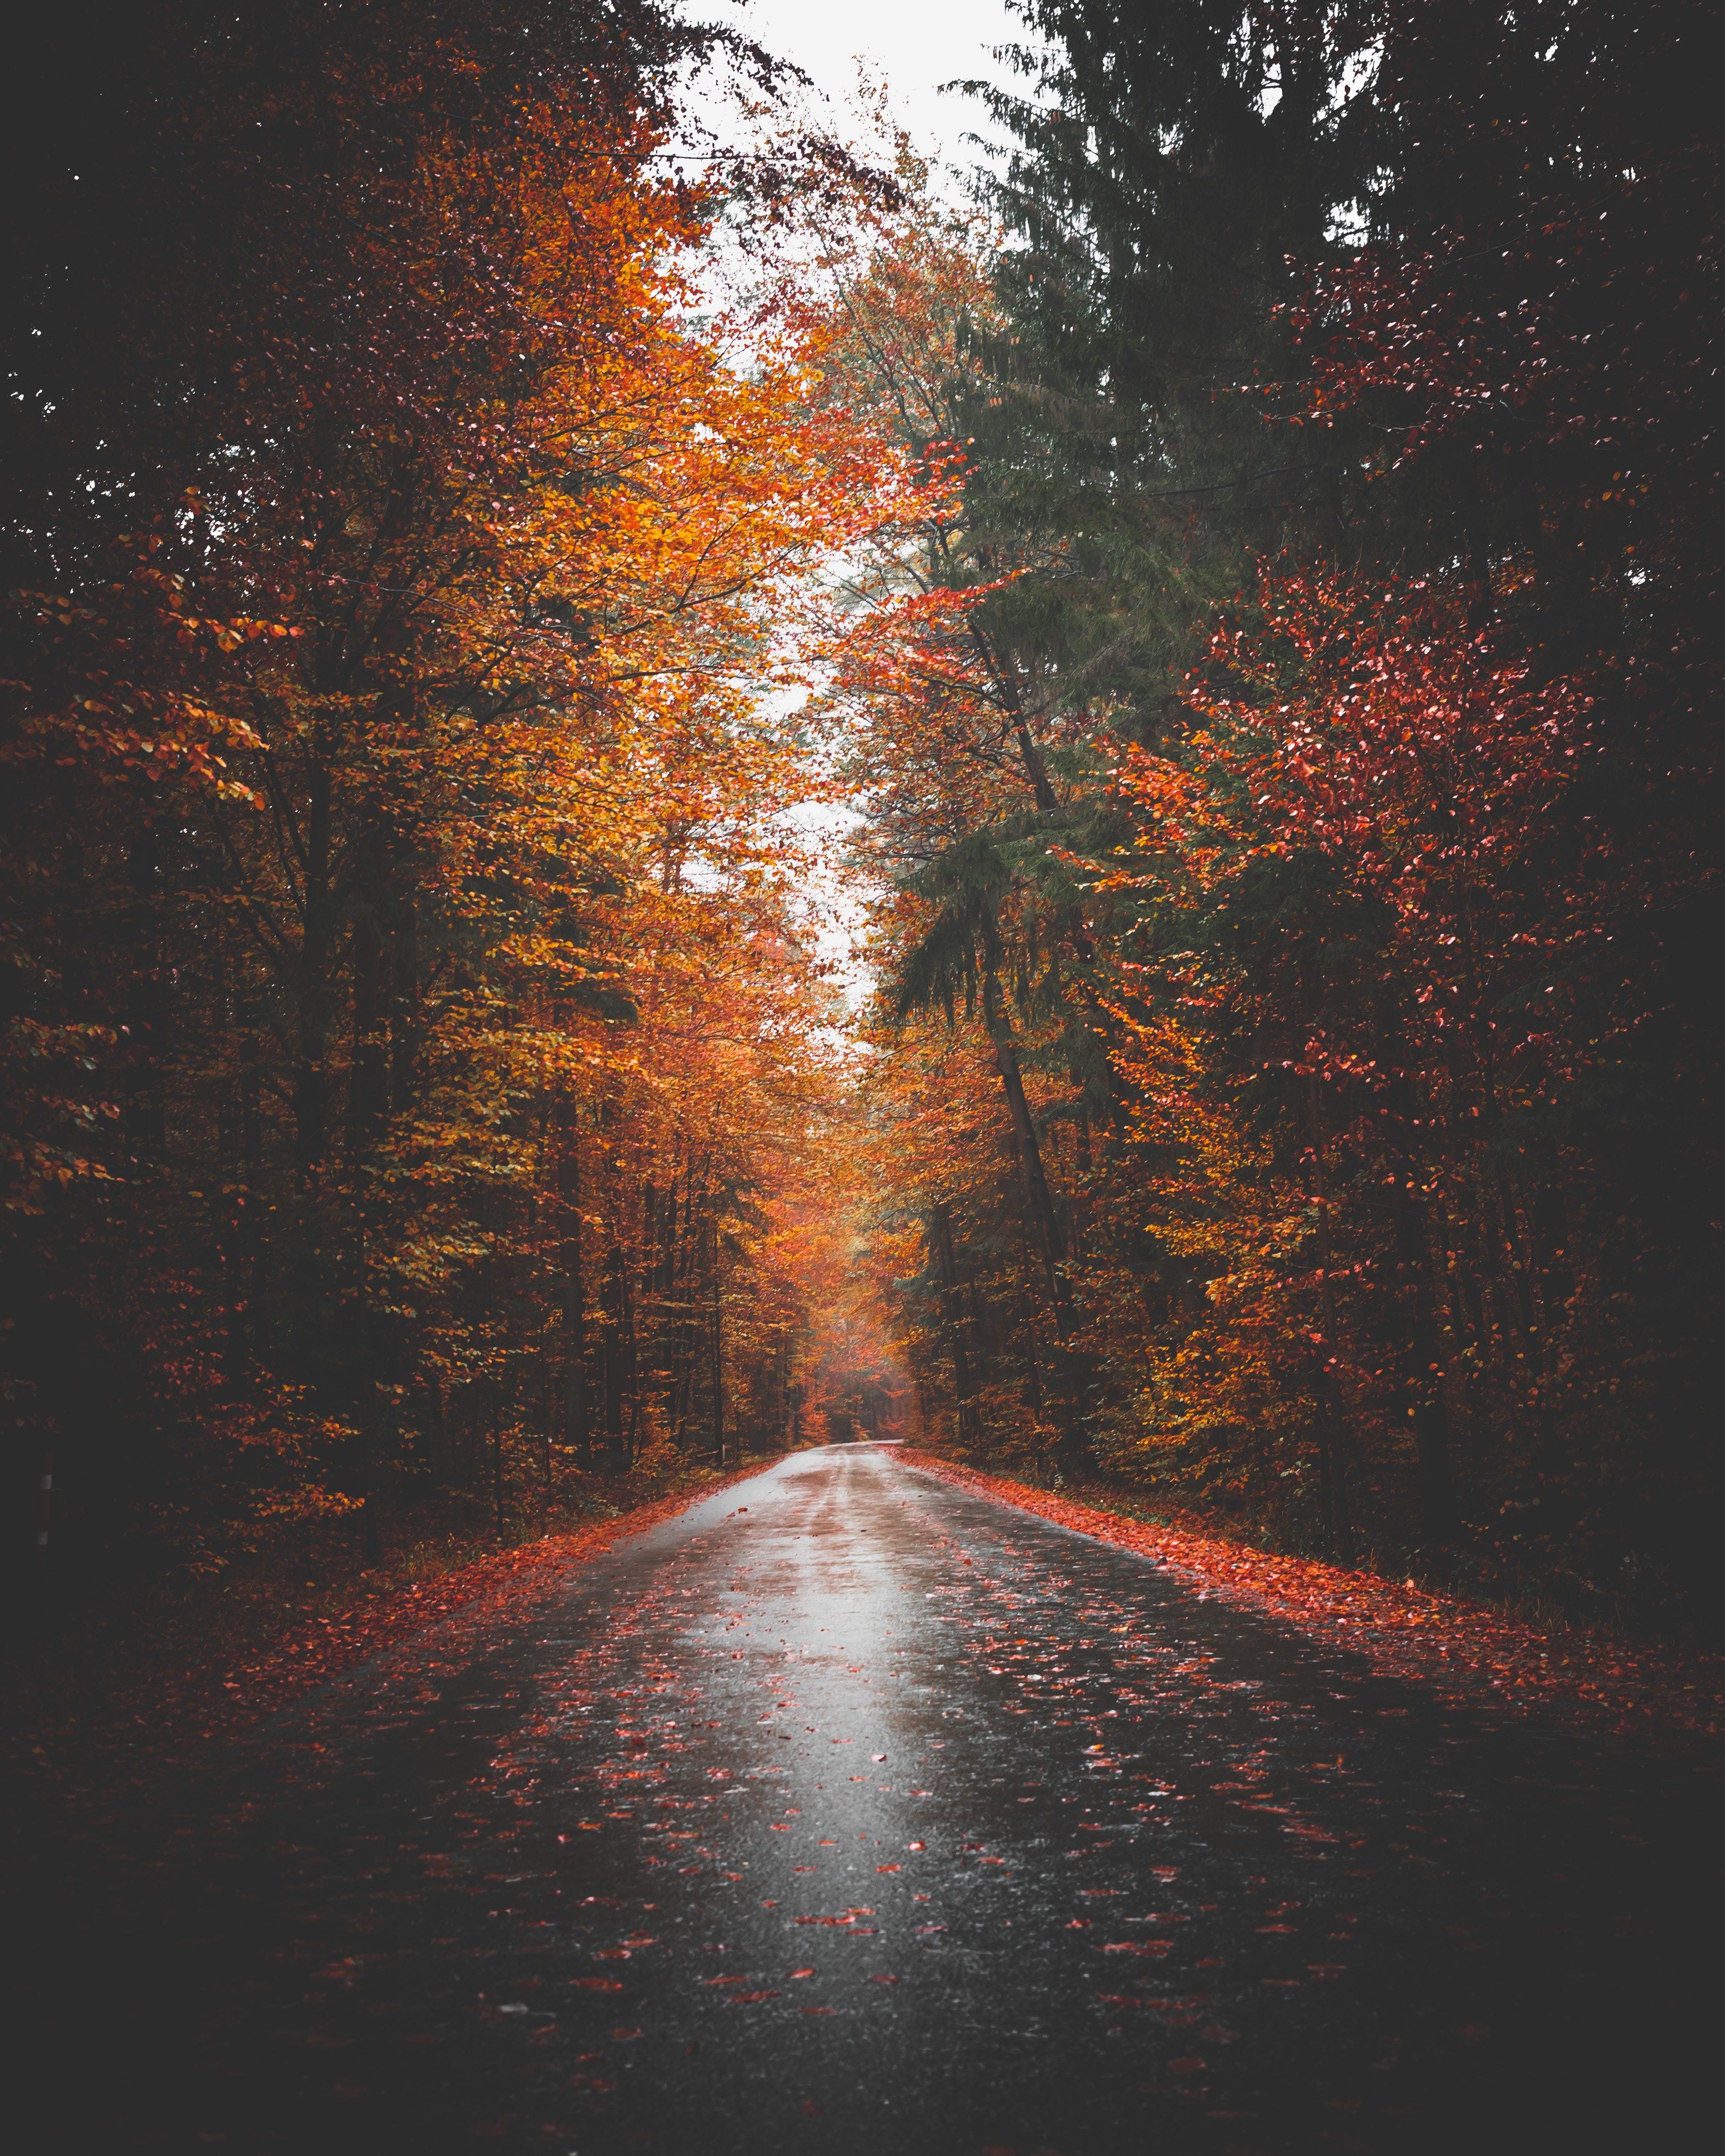 A road surrounded by trees with orange leaves. - Fall, fall iPhone